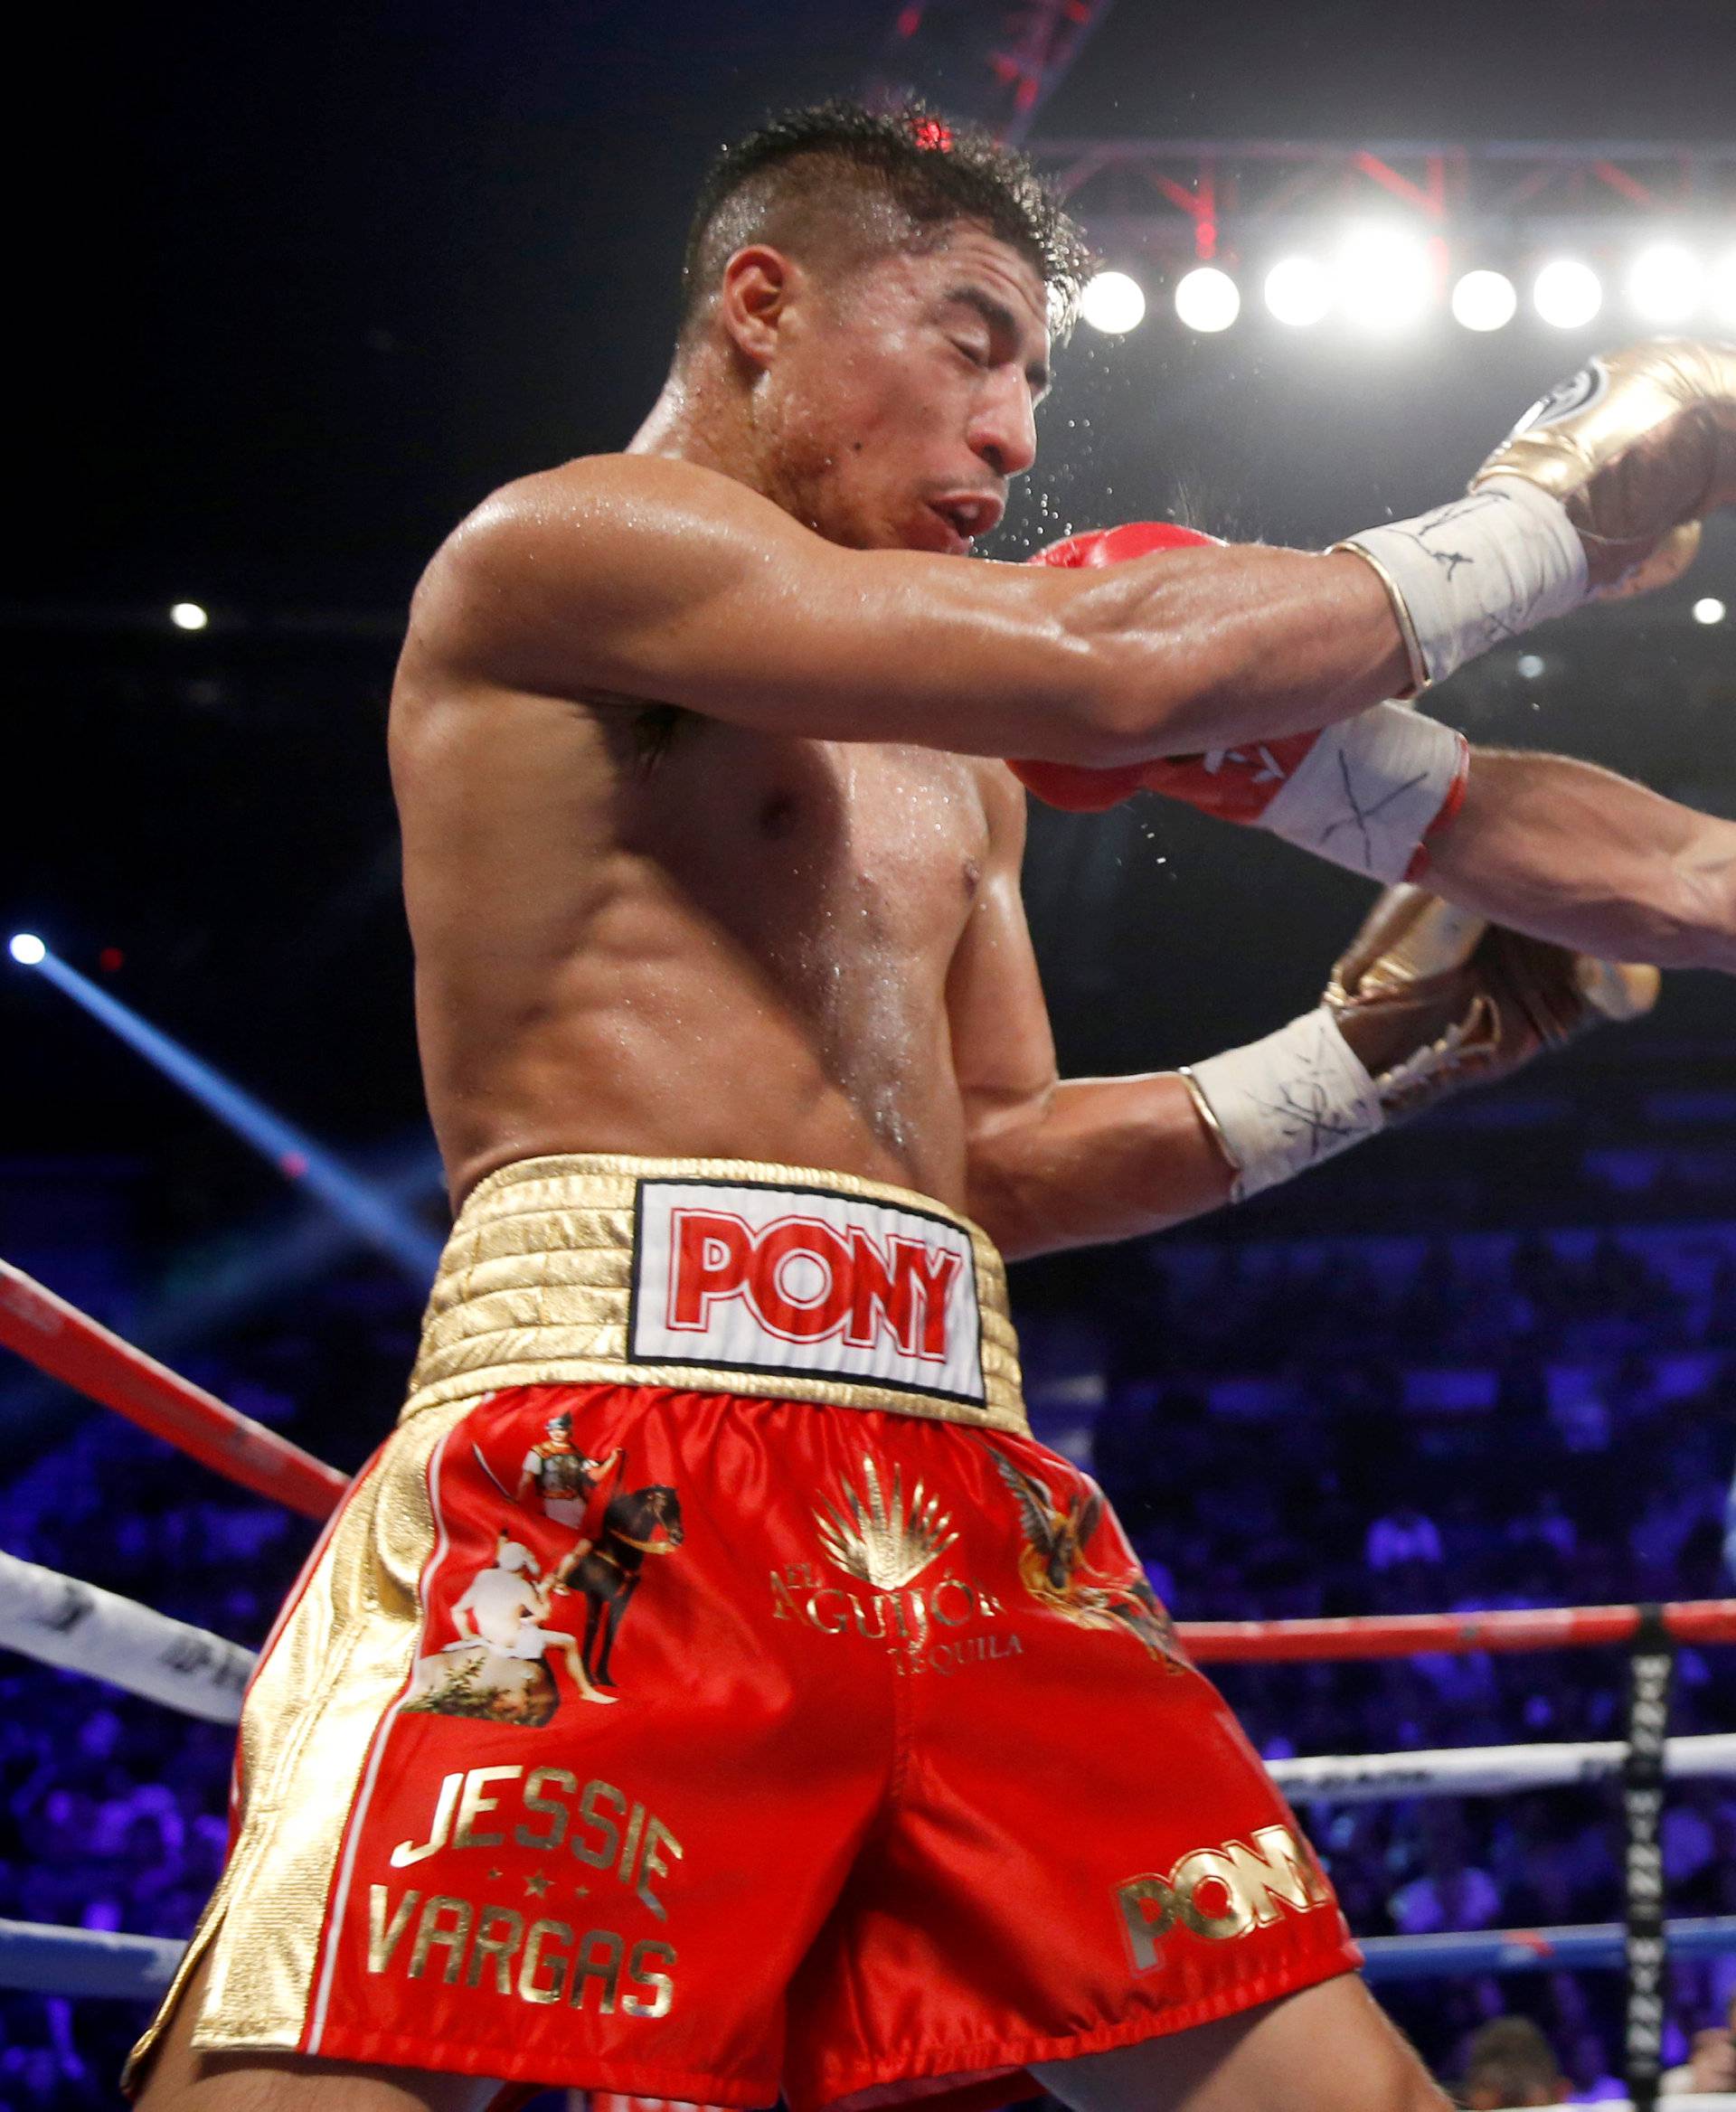 WBO welterweight champion Jessie Vargas (L) of Las Vegas gets hit with a punch from Manny Pacquiao of the Philippines during their title fight at the Thomas & Mack Center in Las Vegas